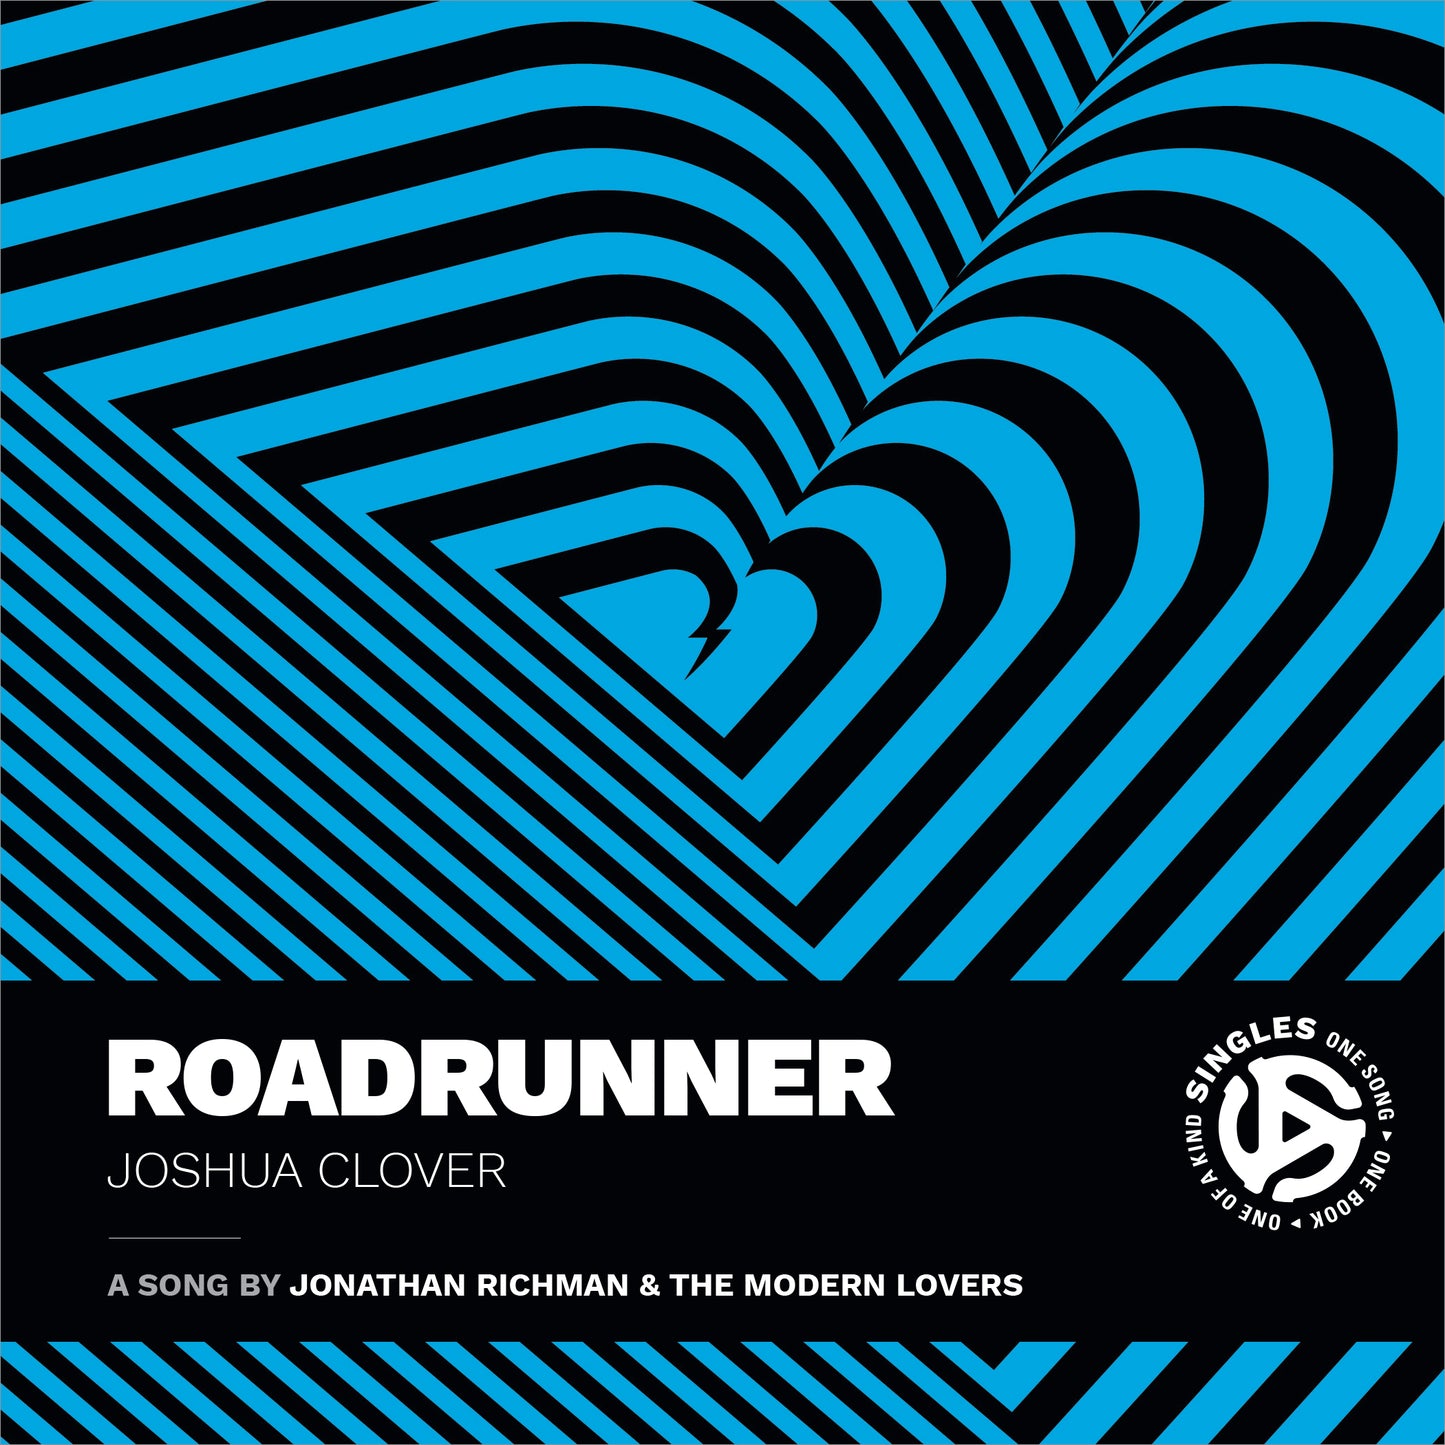 ROADRUNNER: A SONG BY JONATHAN RICHMAN AND THE MODERN LOVERS - BOOK